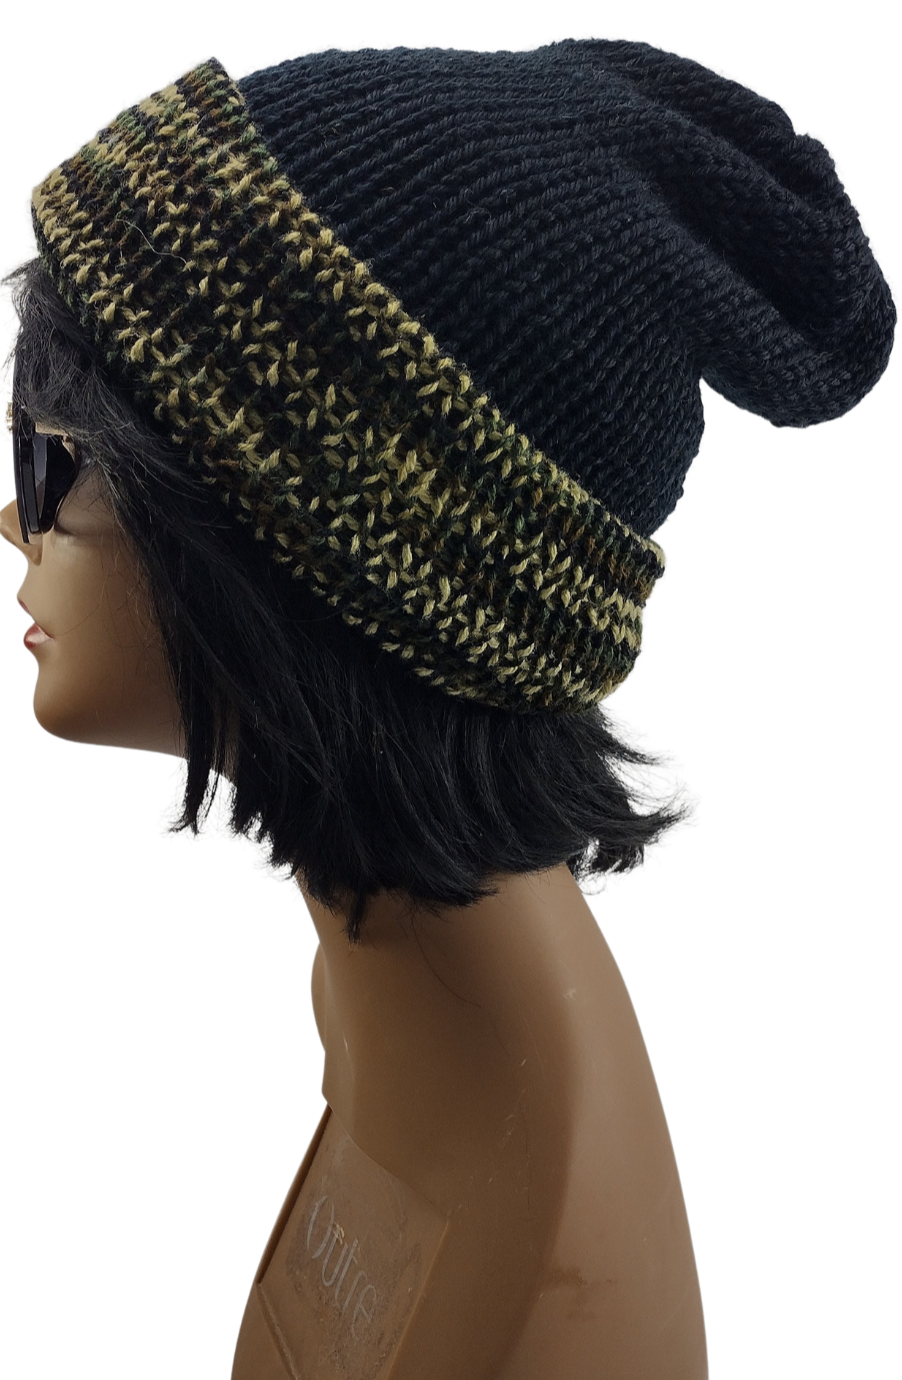 Unisex Slouch Knitted Camouflage and Black Knit Double Layer Fold Over Slouchy Beanie - Unisex - For Men or Women - Ready to Ship